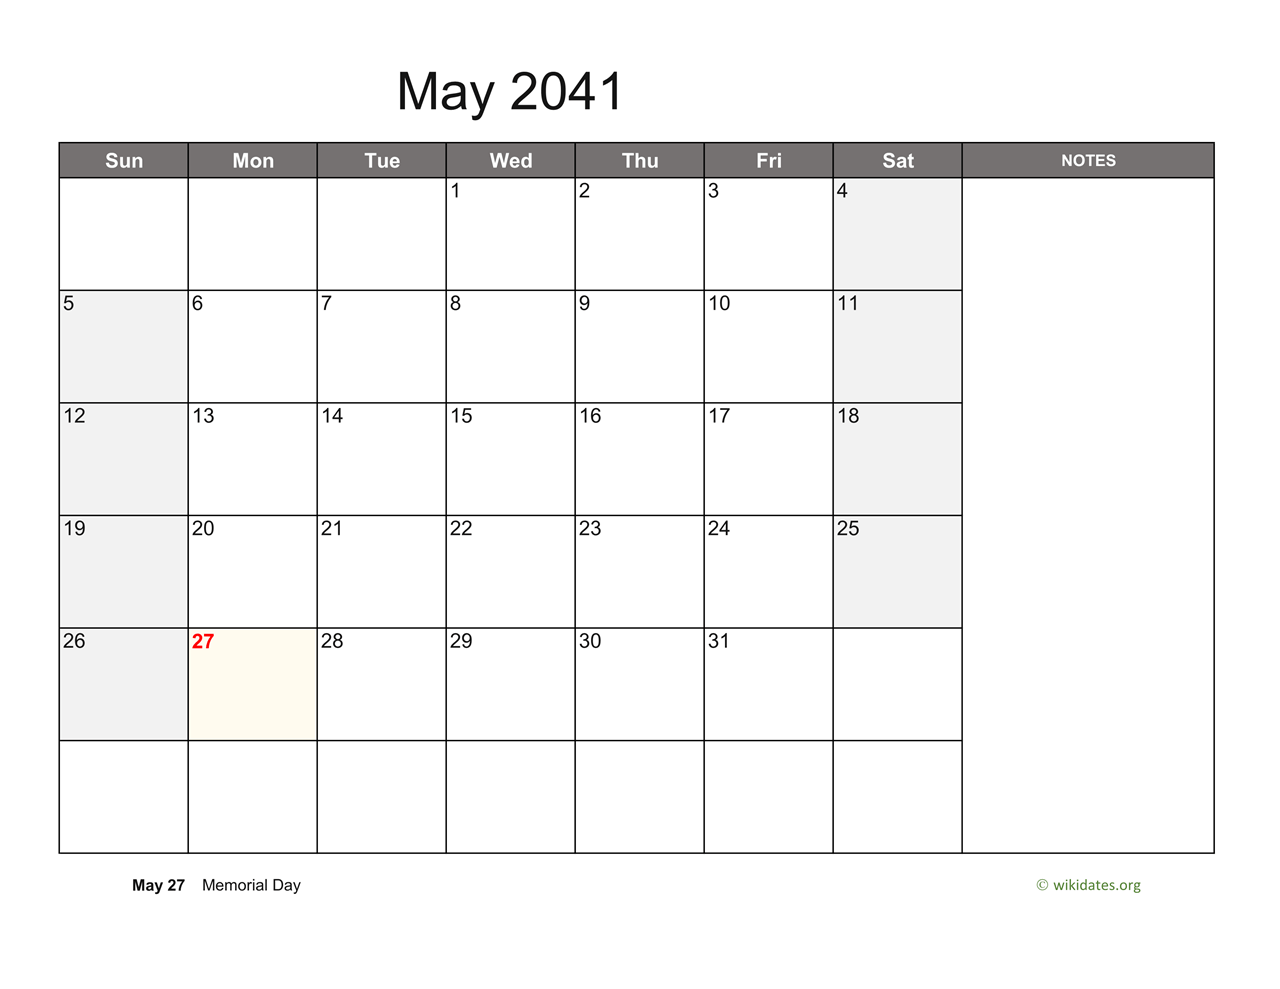 May 2041 Calendar with Notes